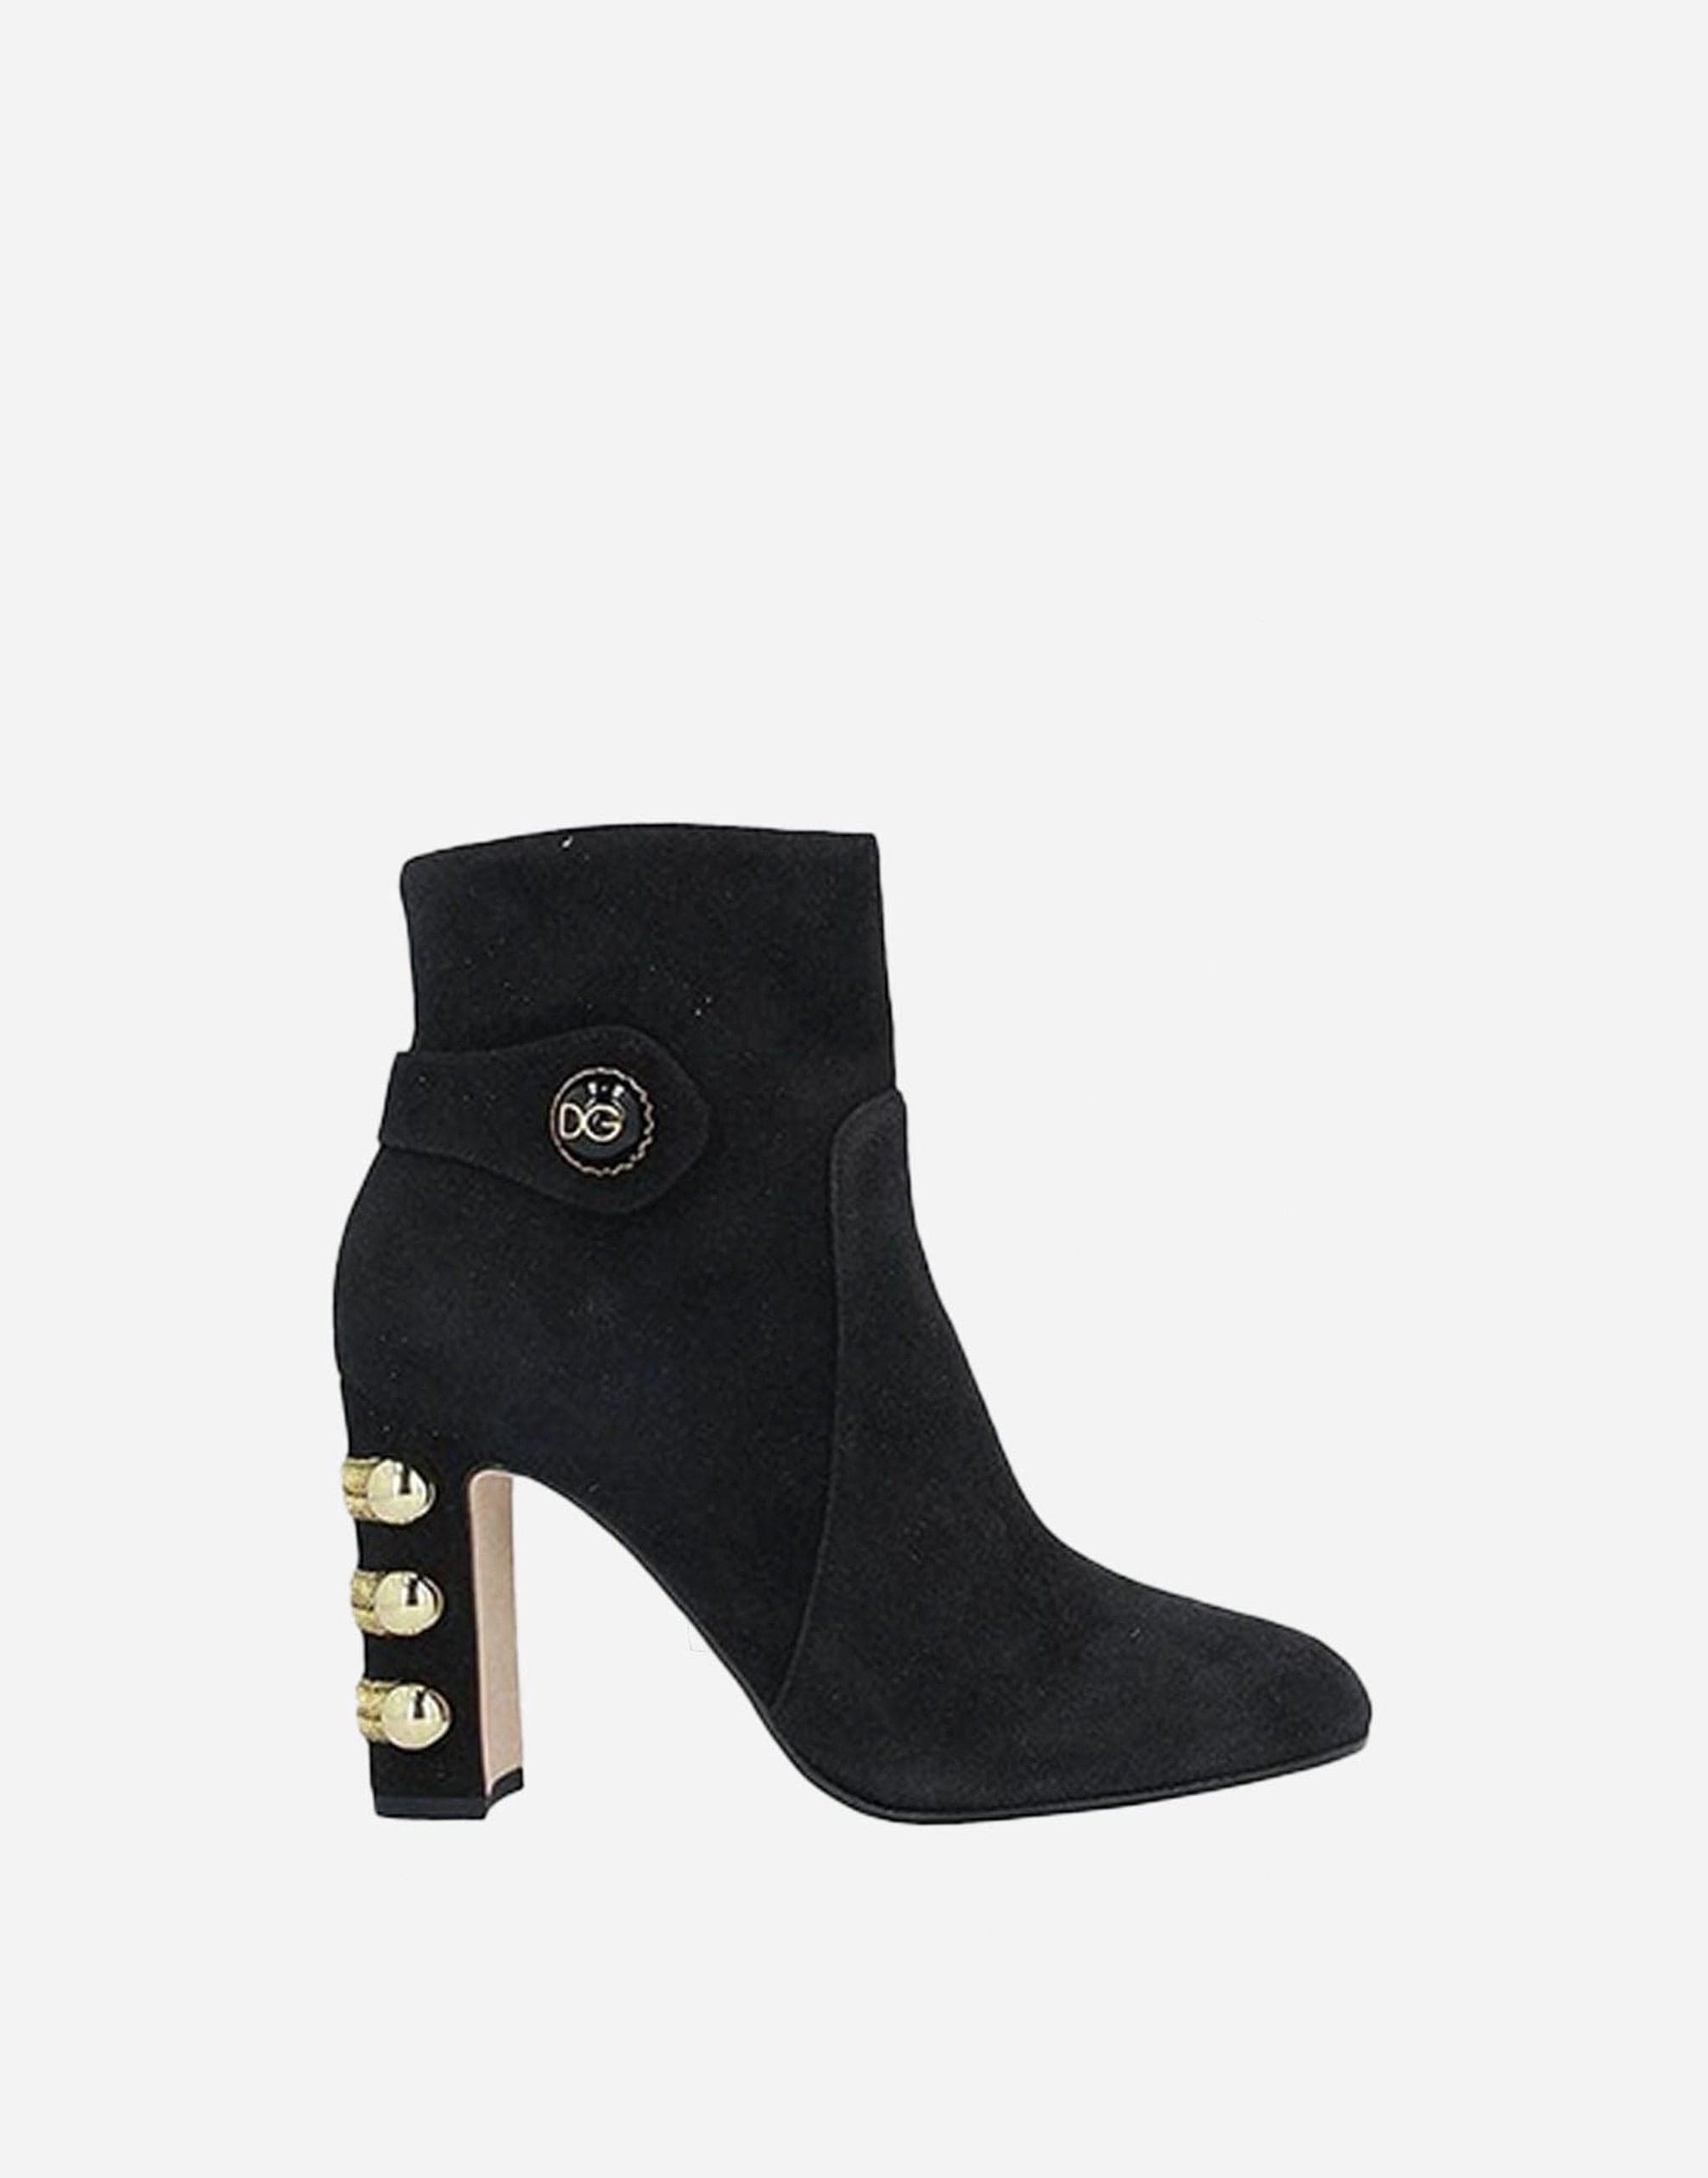 Dolce & Gabbana Logo Suede Ankle Boots